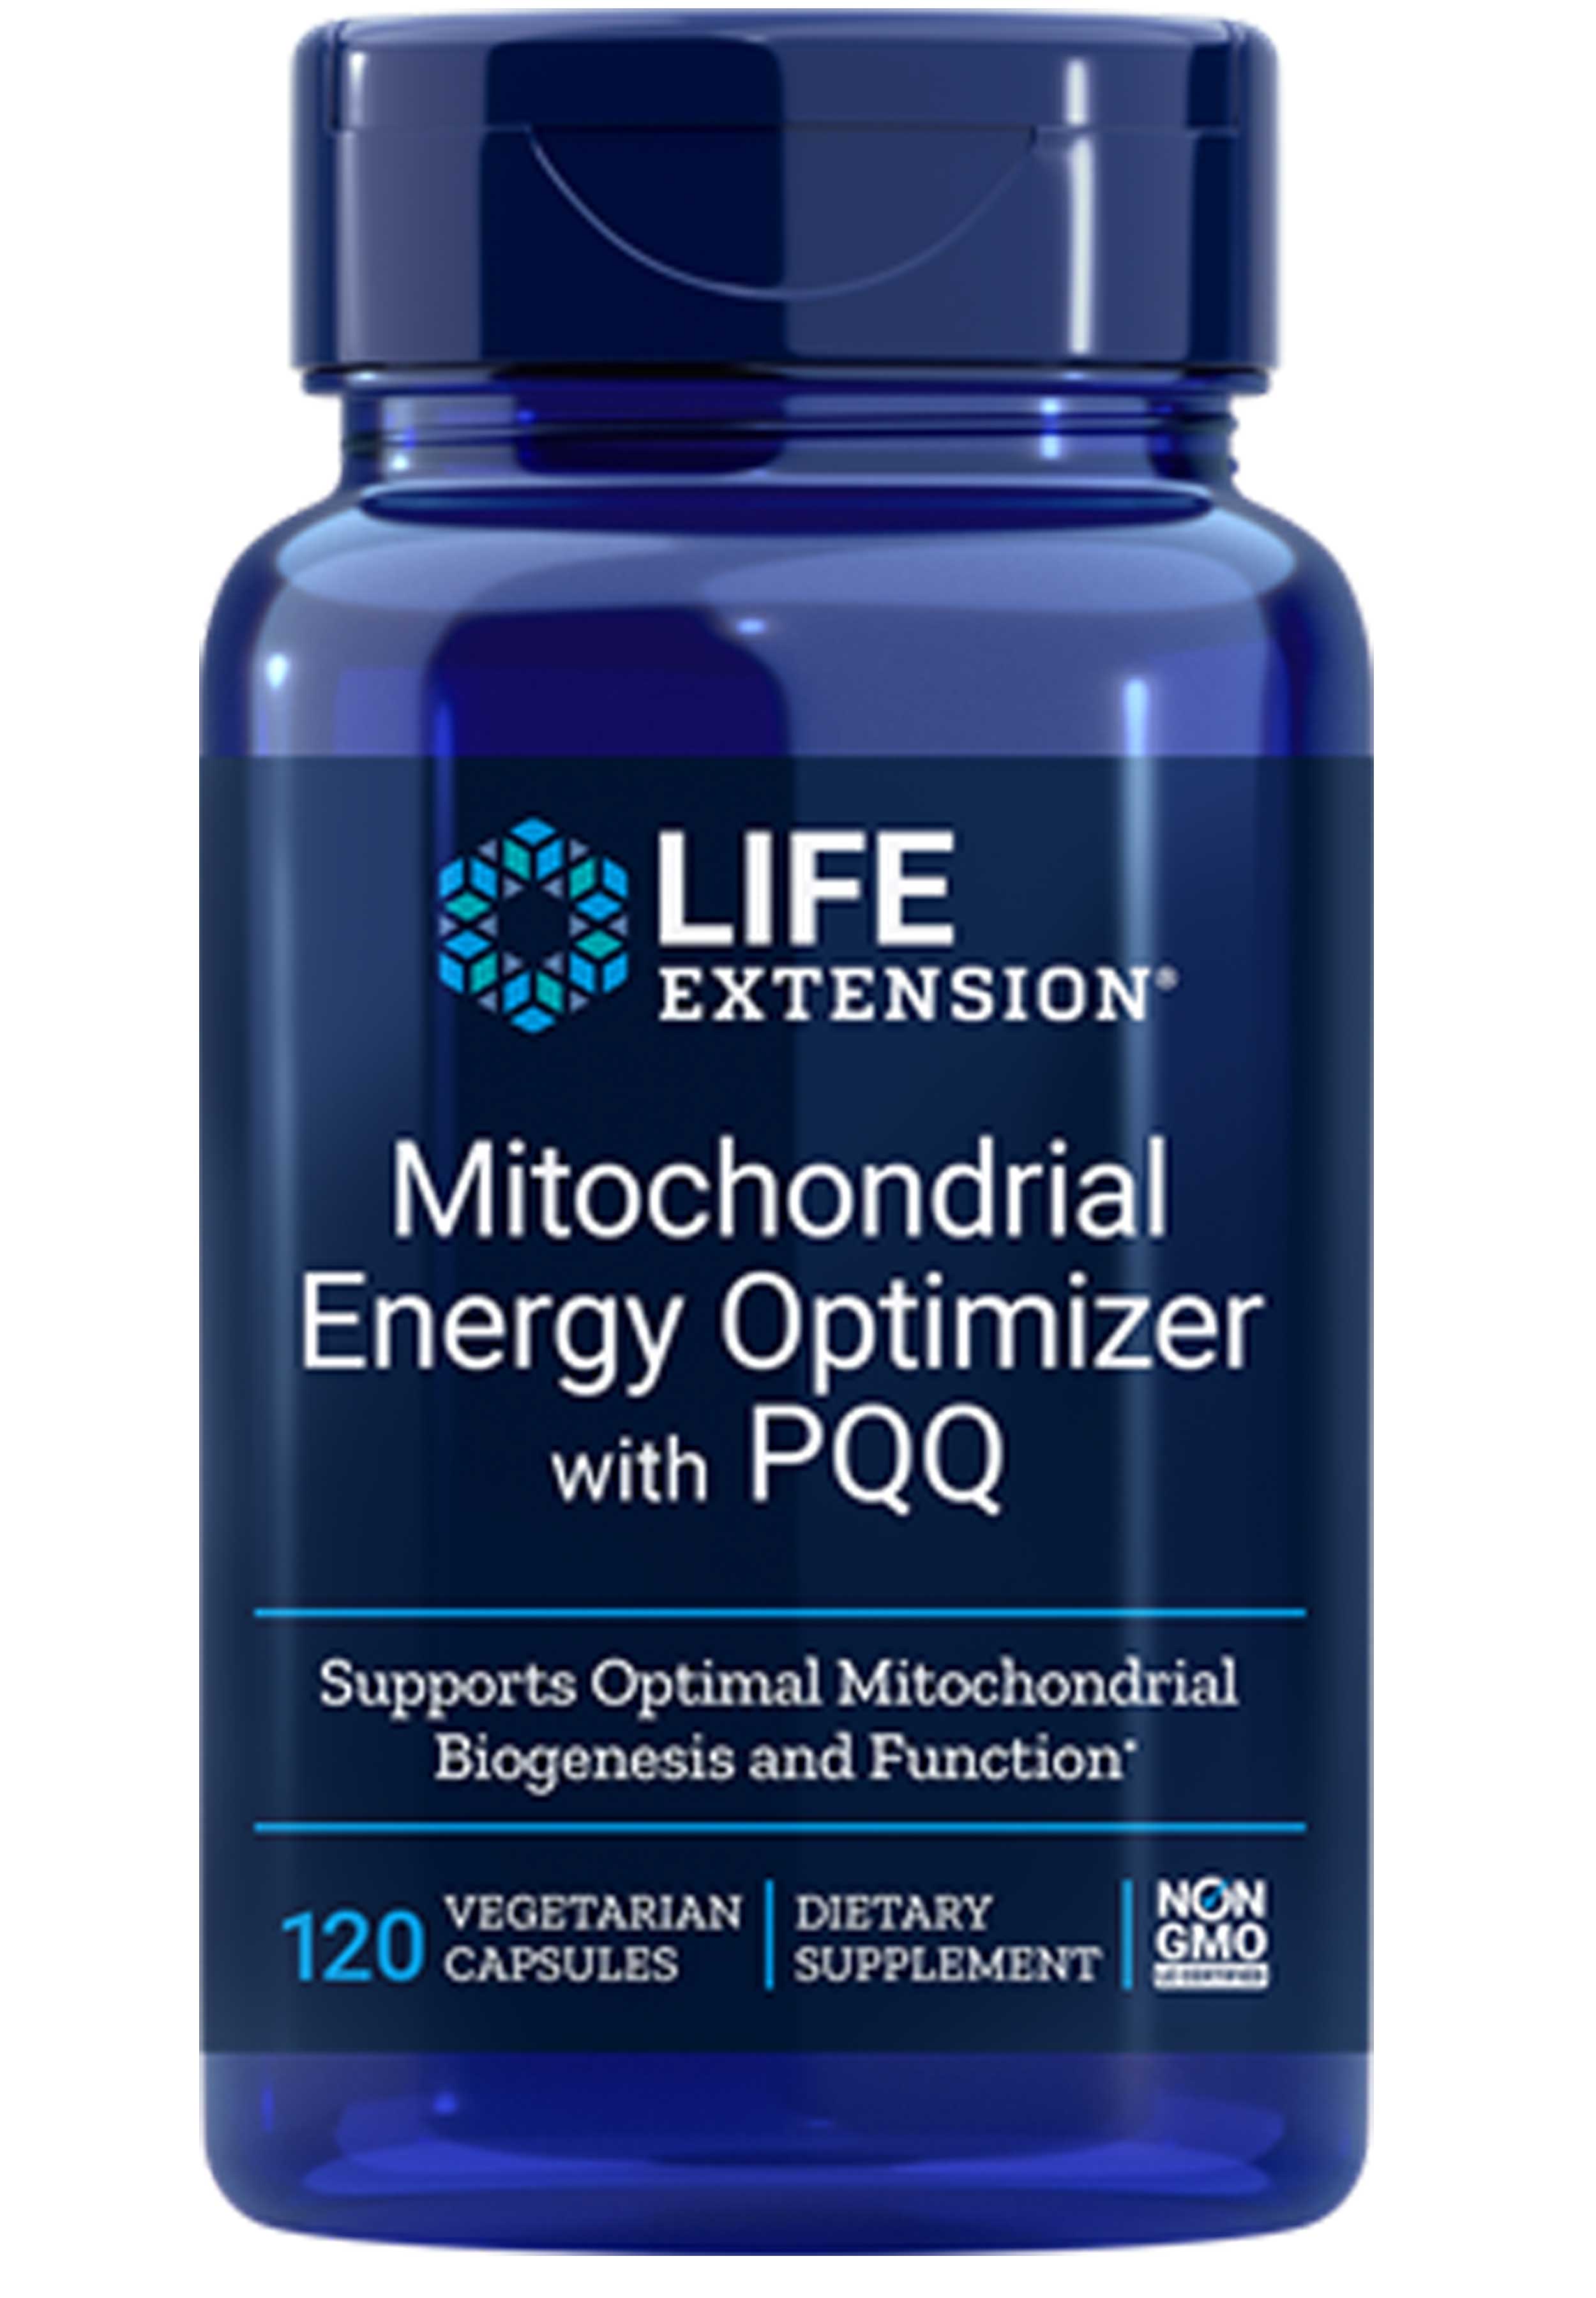 Life Extension Mitochondrial Energy Optimizer with PQQ